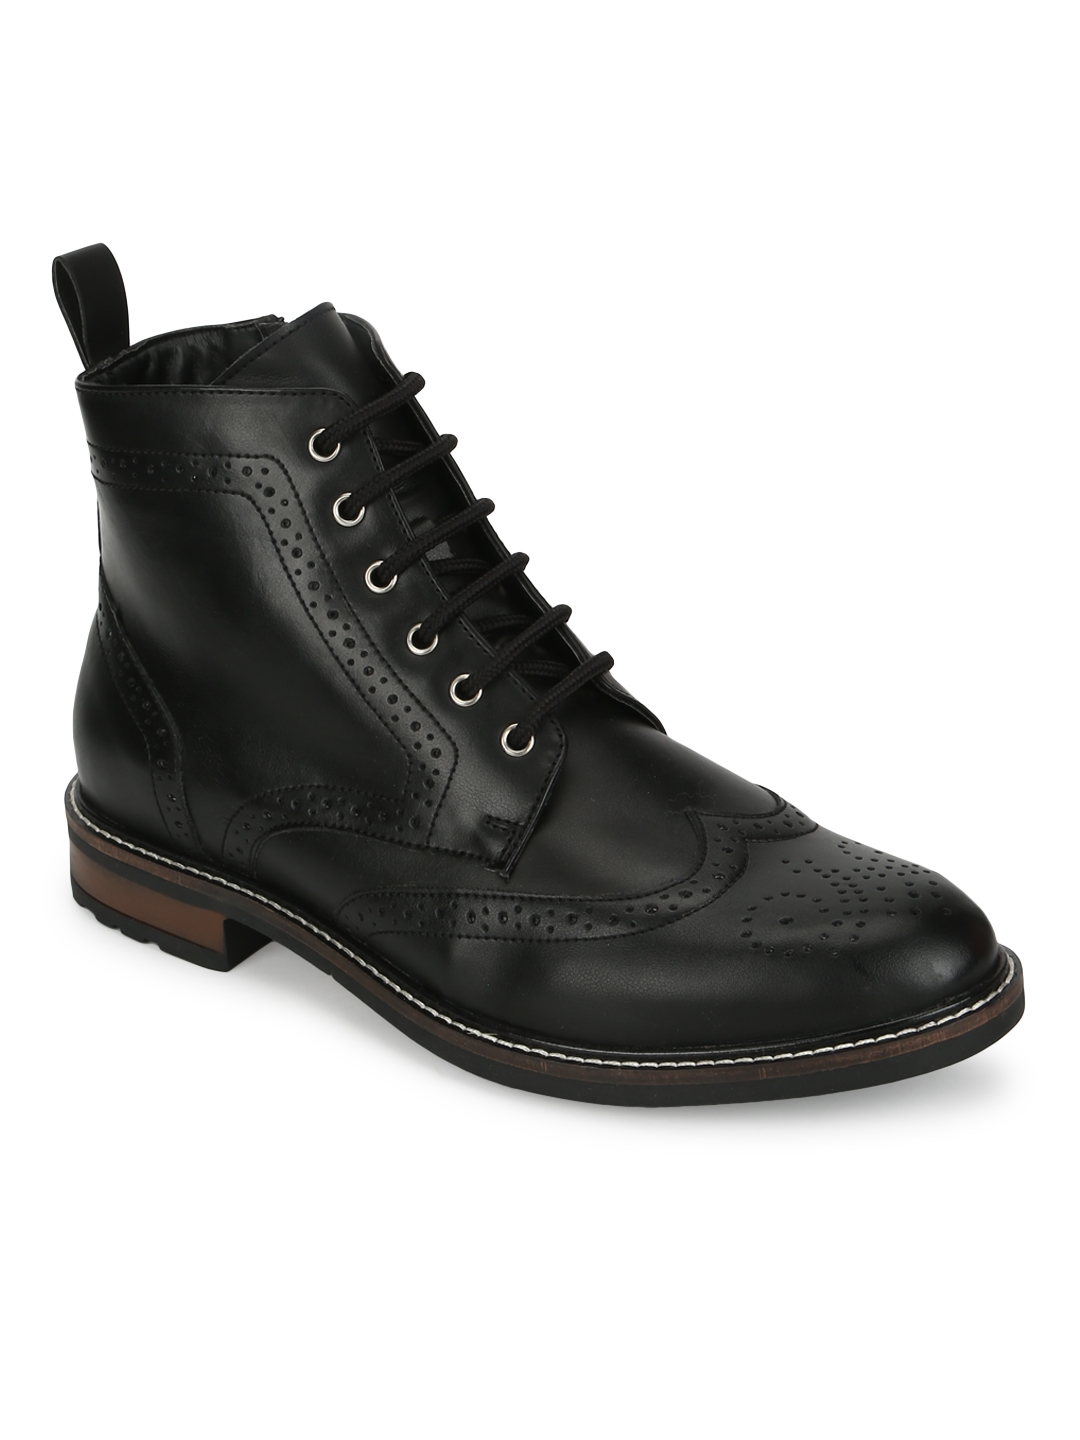 Truffle Collection | Black PU Lace Up Men's Ankle Boots